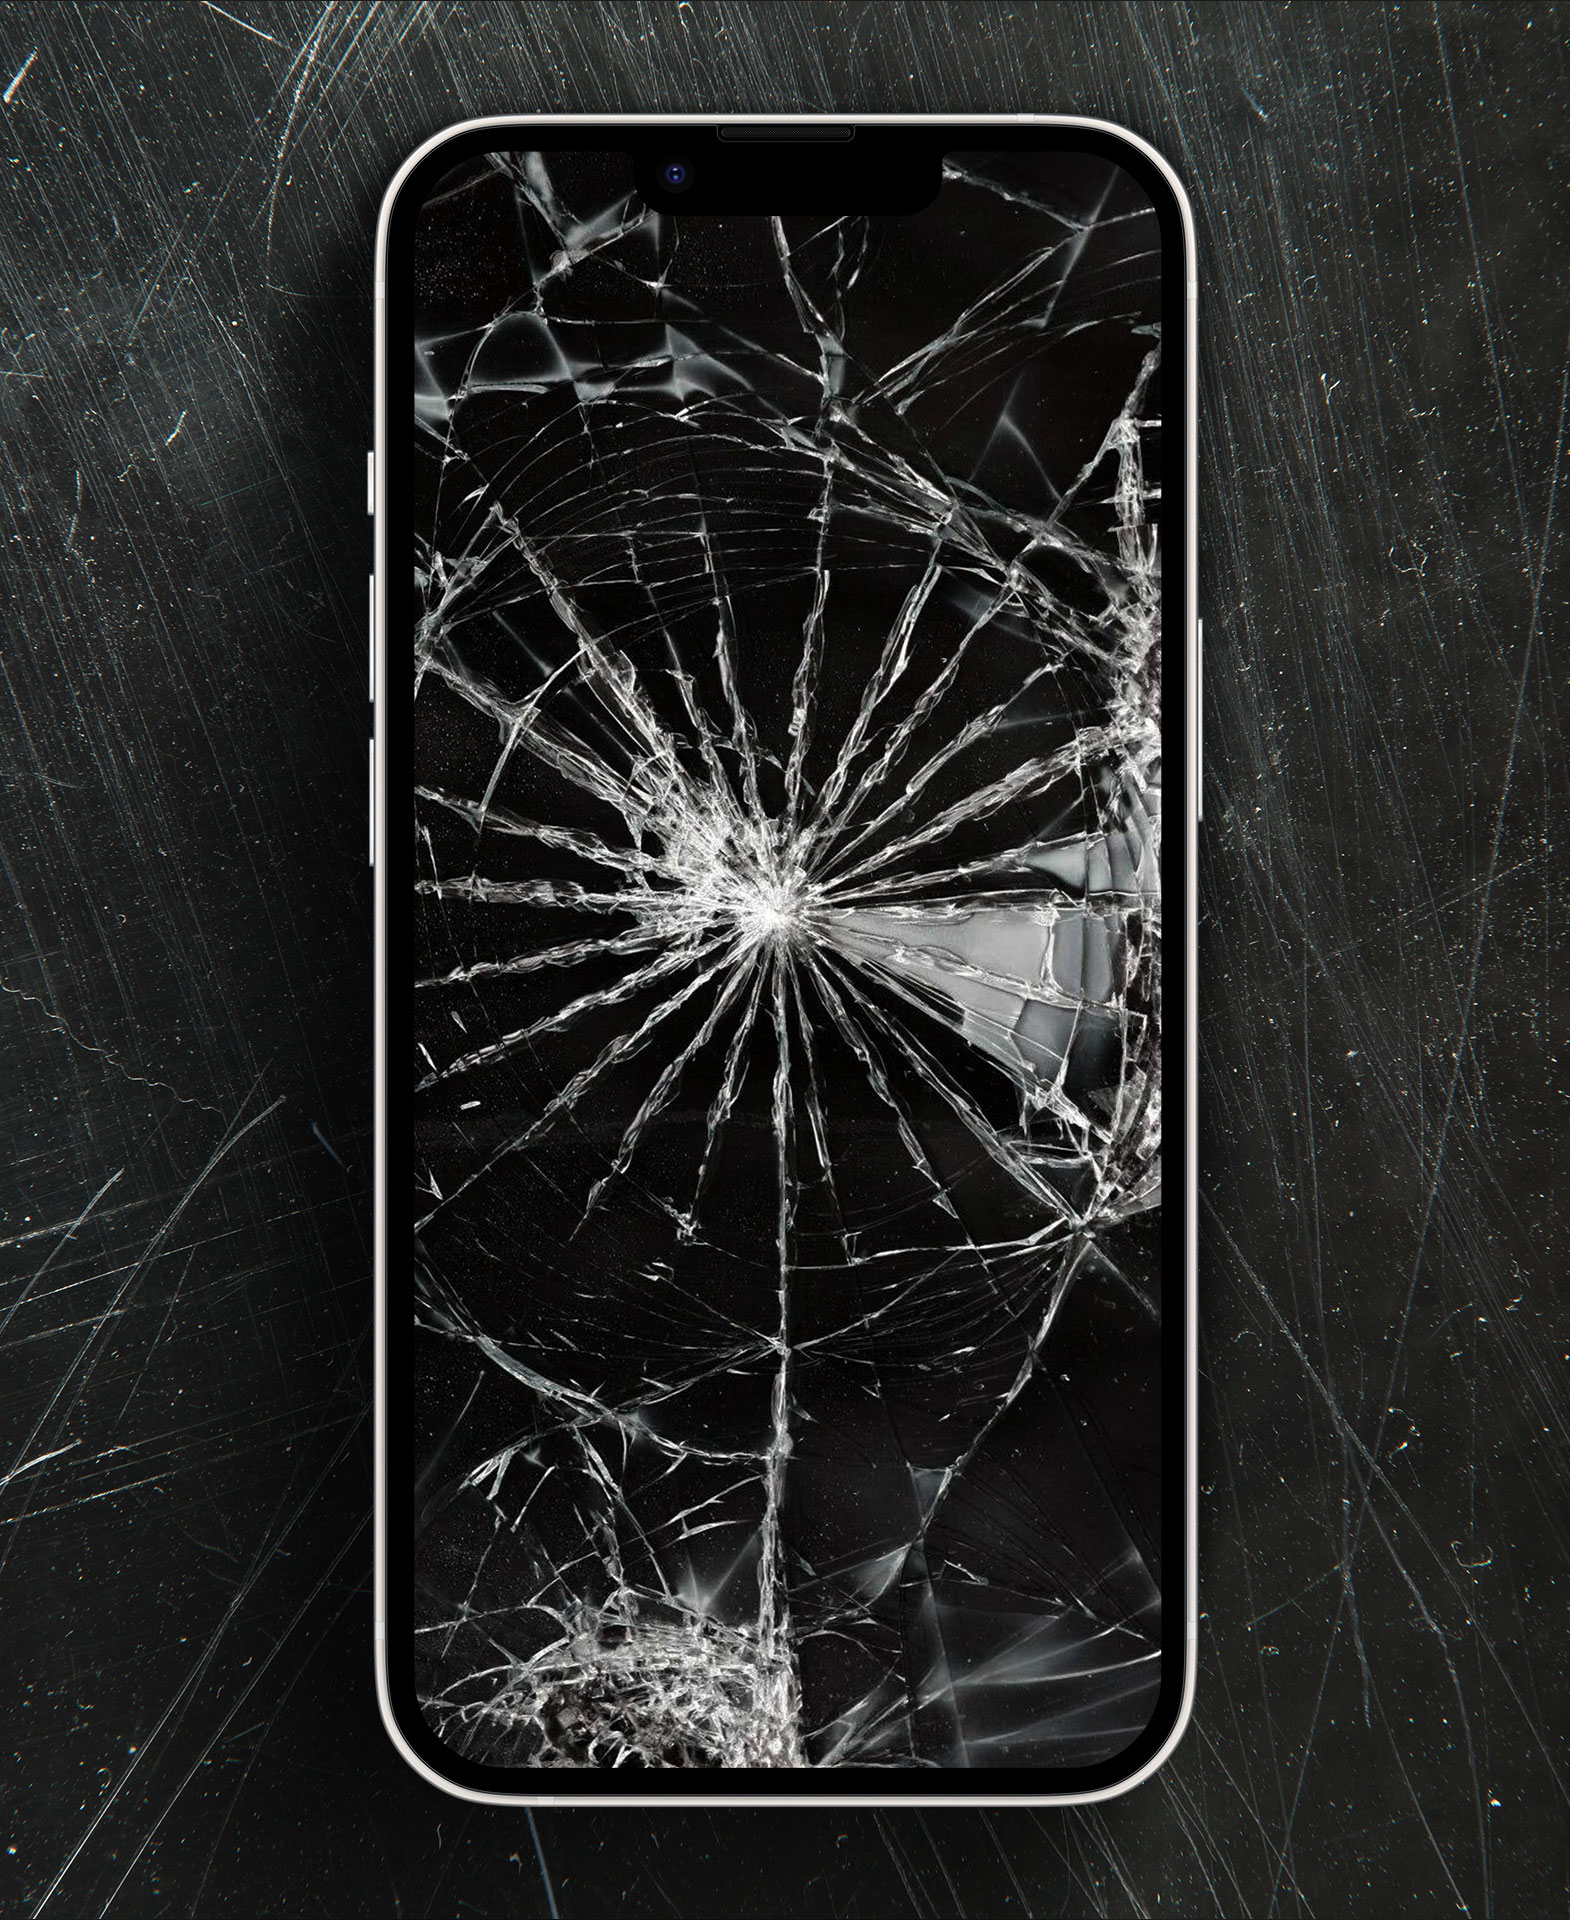 Broken Glass Live Wallpapers:Amazon.com:Appstore for Android